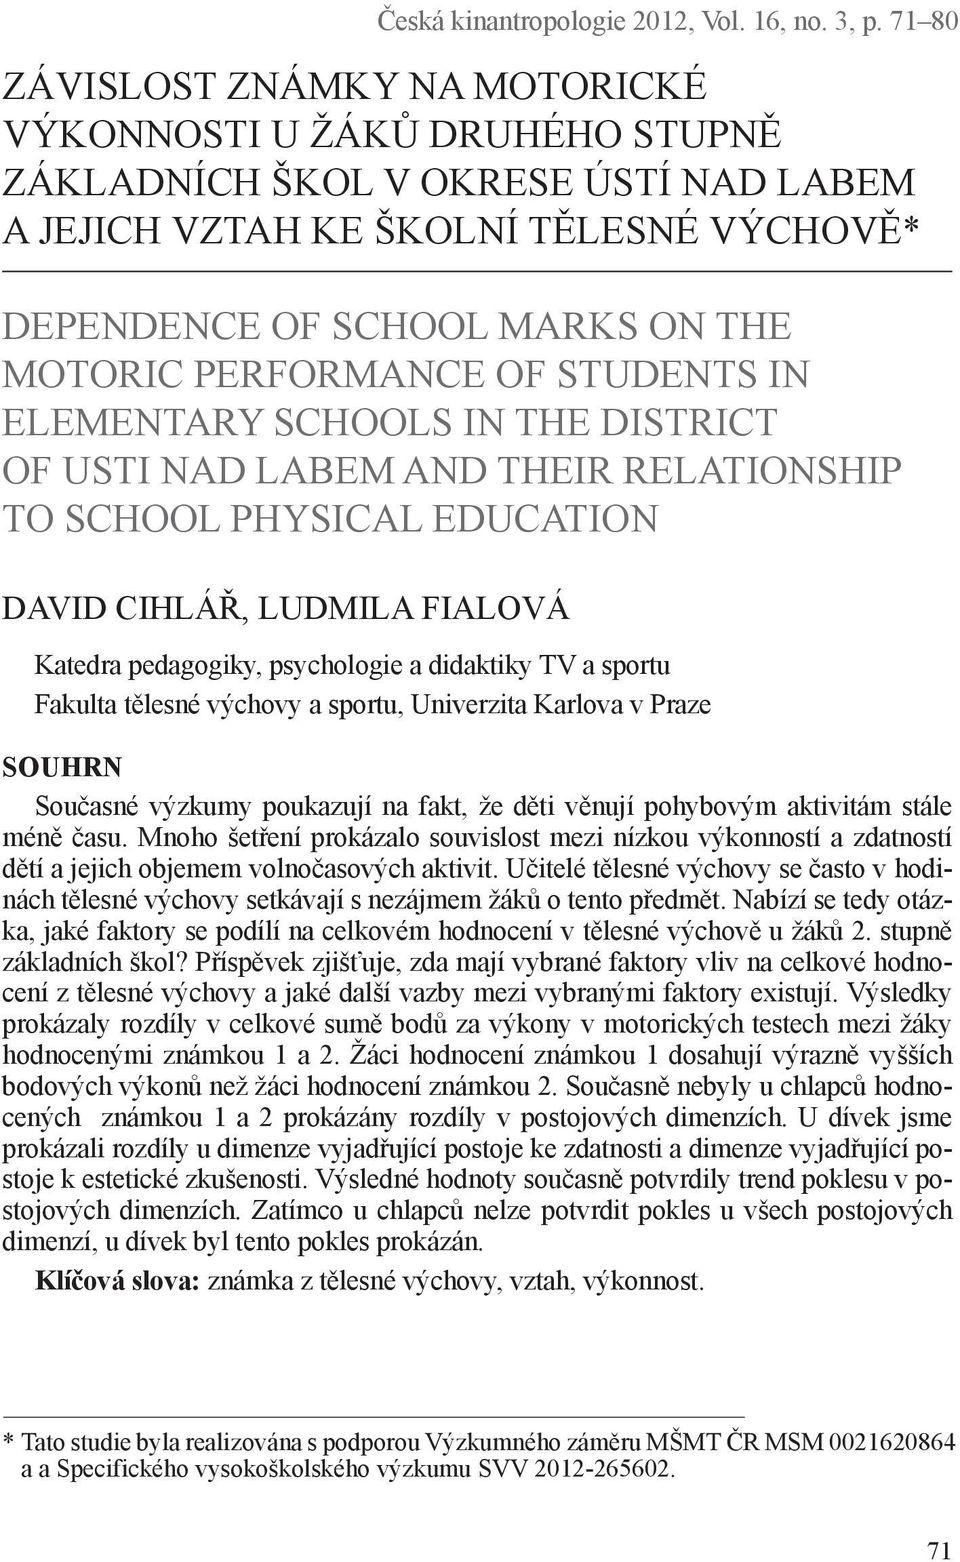 PERFORMANCE OF STUDENTS IN ELEMENTARY SCHOOLS IN THE DISTRICT OF USTI NAD LABEM AND THEIR RELATIONSHIP TO SCHOOL PHYSICAL EDUCATION DAVID CIHLÁŘ, LUDMILA FIALOVÁ Katedra pedagogiky, psychologie a